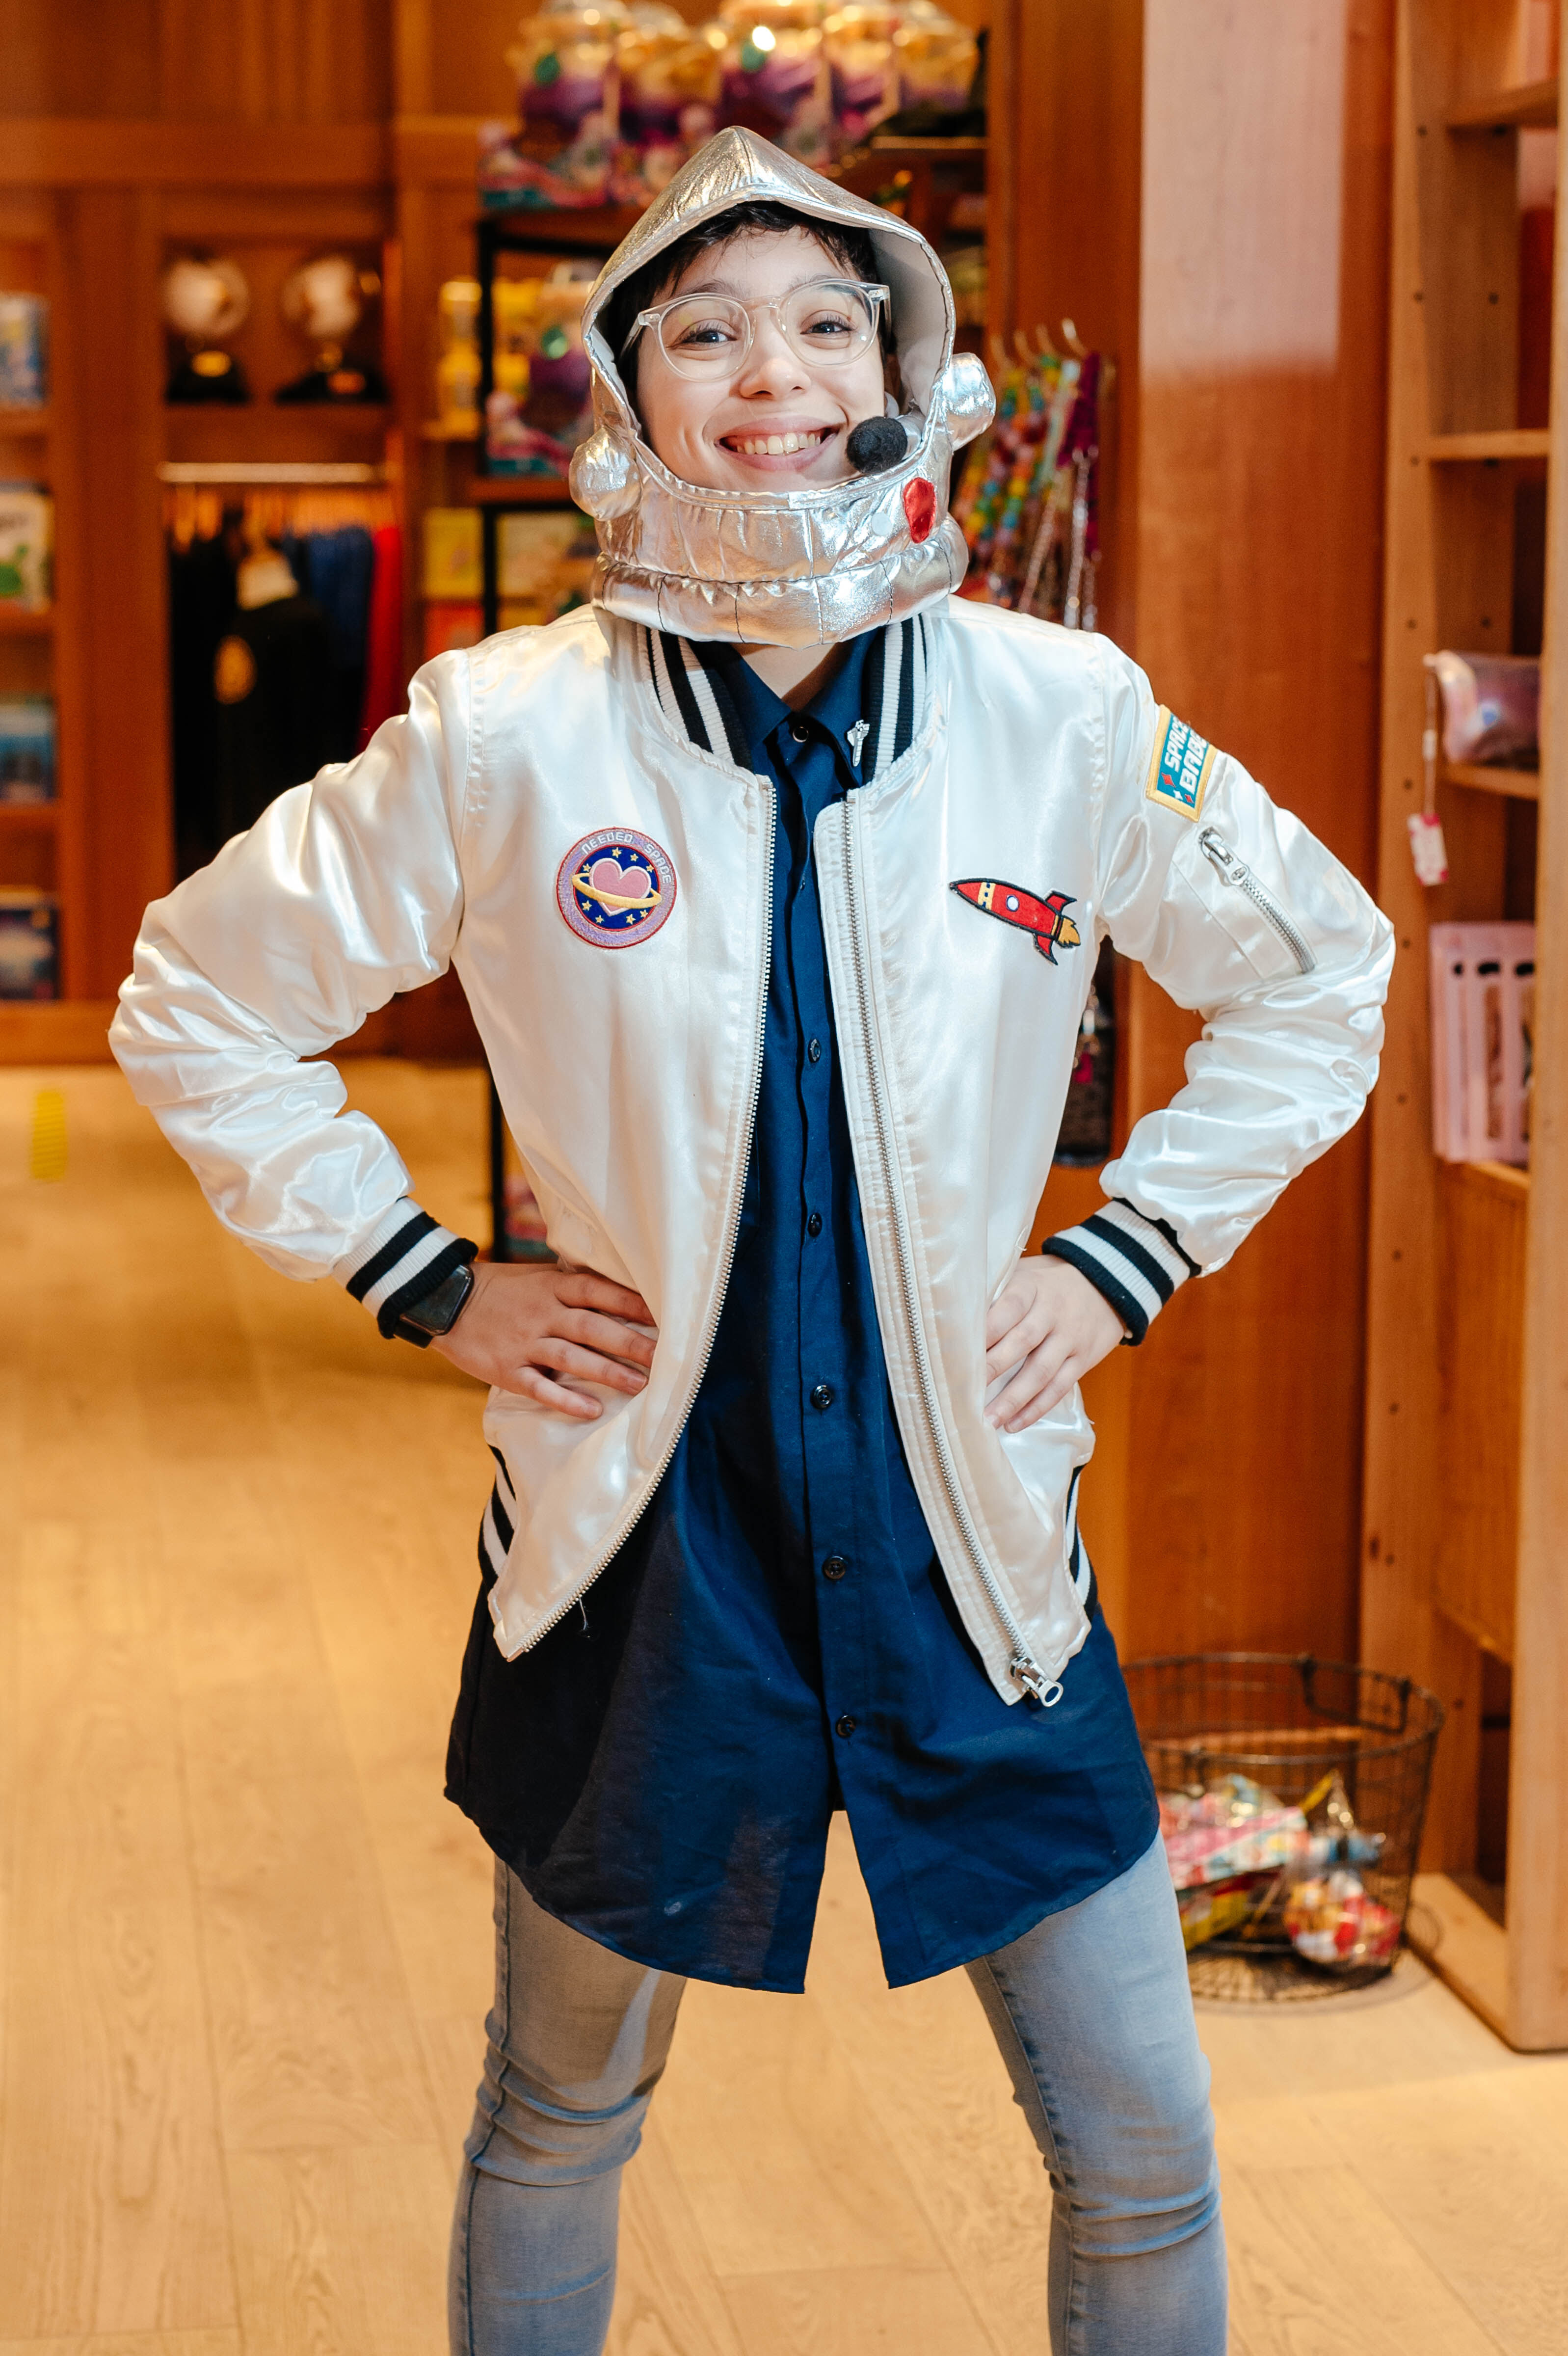 Staff member in astronaut outfit